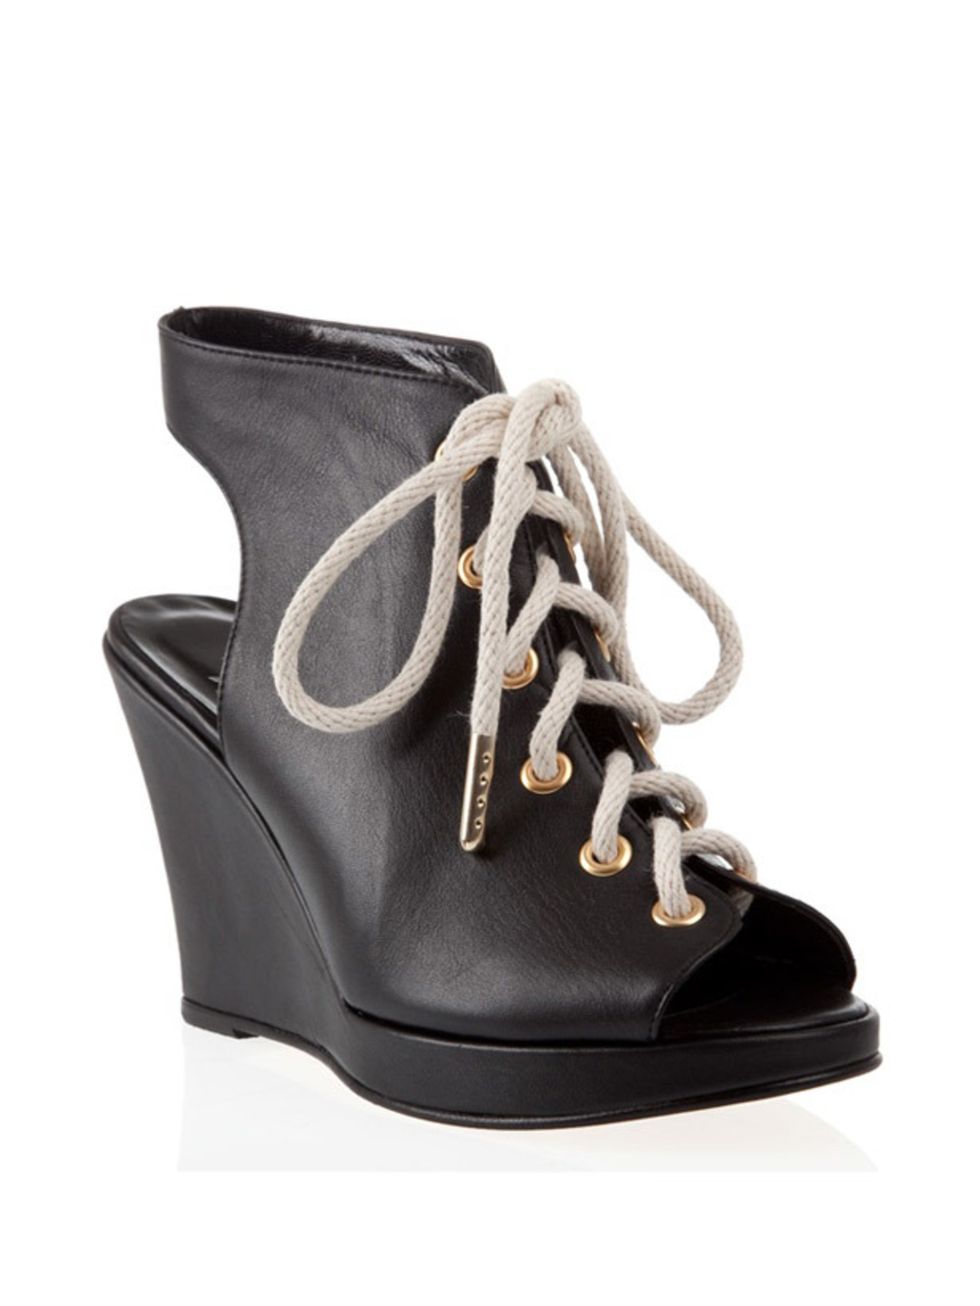 <p>Lace-up wedge sandal, £295, by Opening Ceremony at <a href="http://www.farfetch.com/shopping/women/footwear/item10030192.aspx?storeid=0">Farfetch</a> </p>